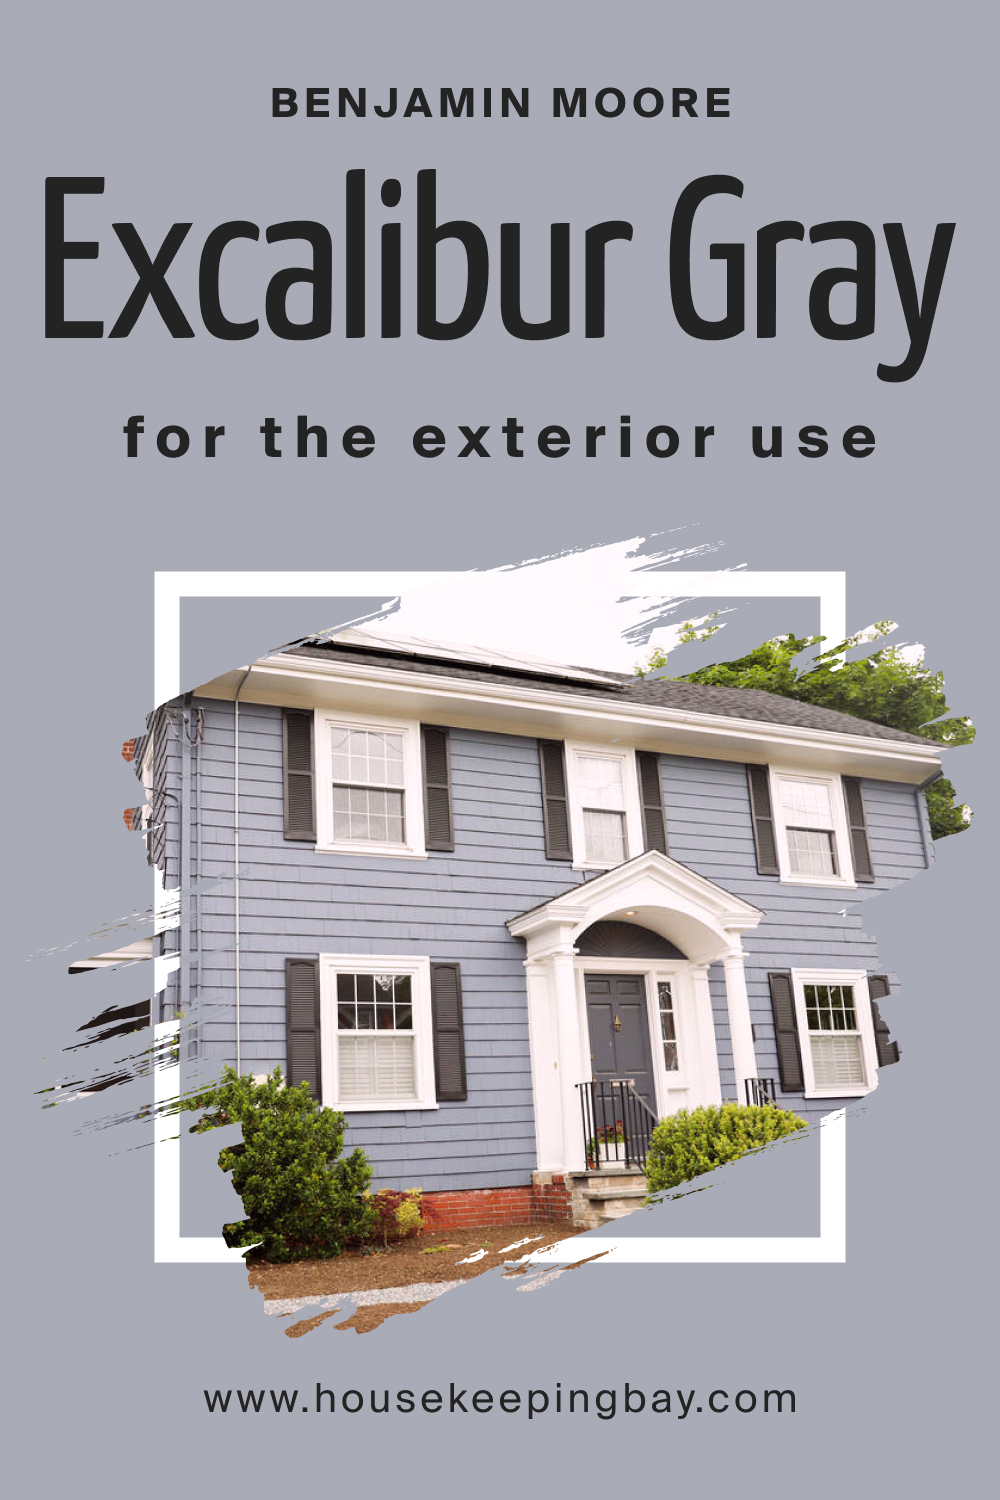 How to Use BM Excalibur Gray 2118-50 for an Exterior?